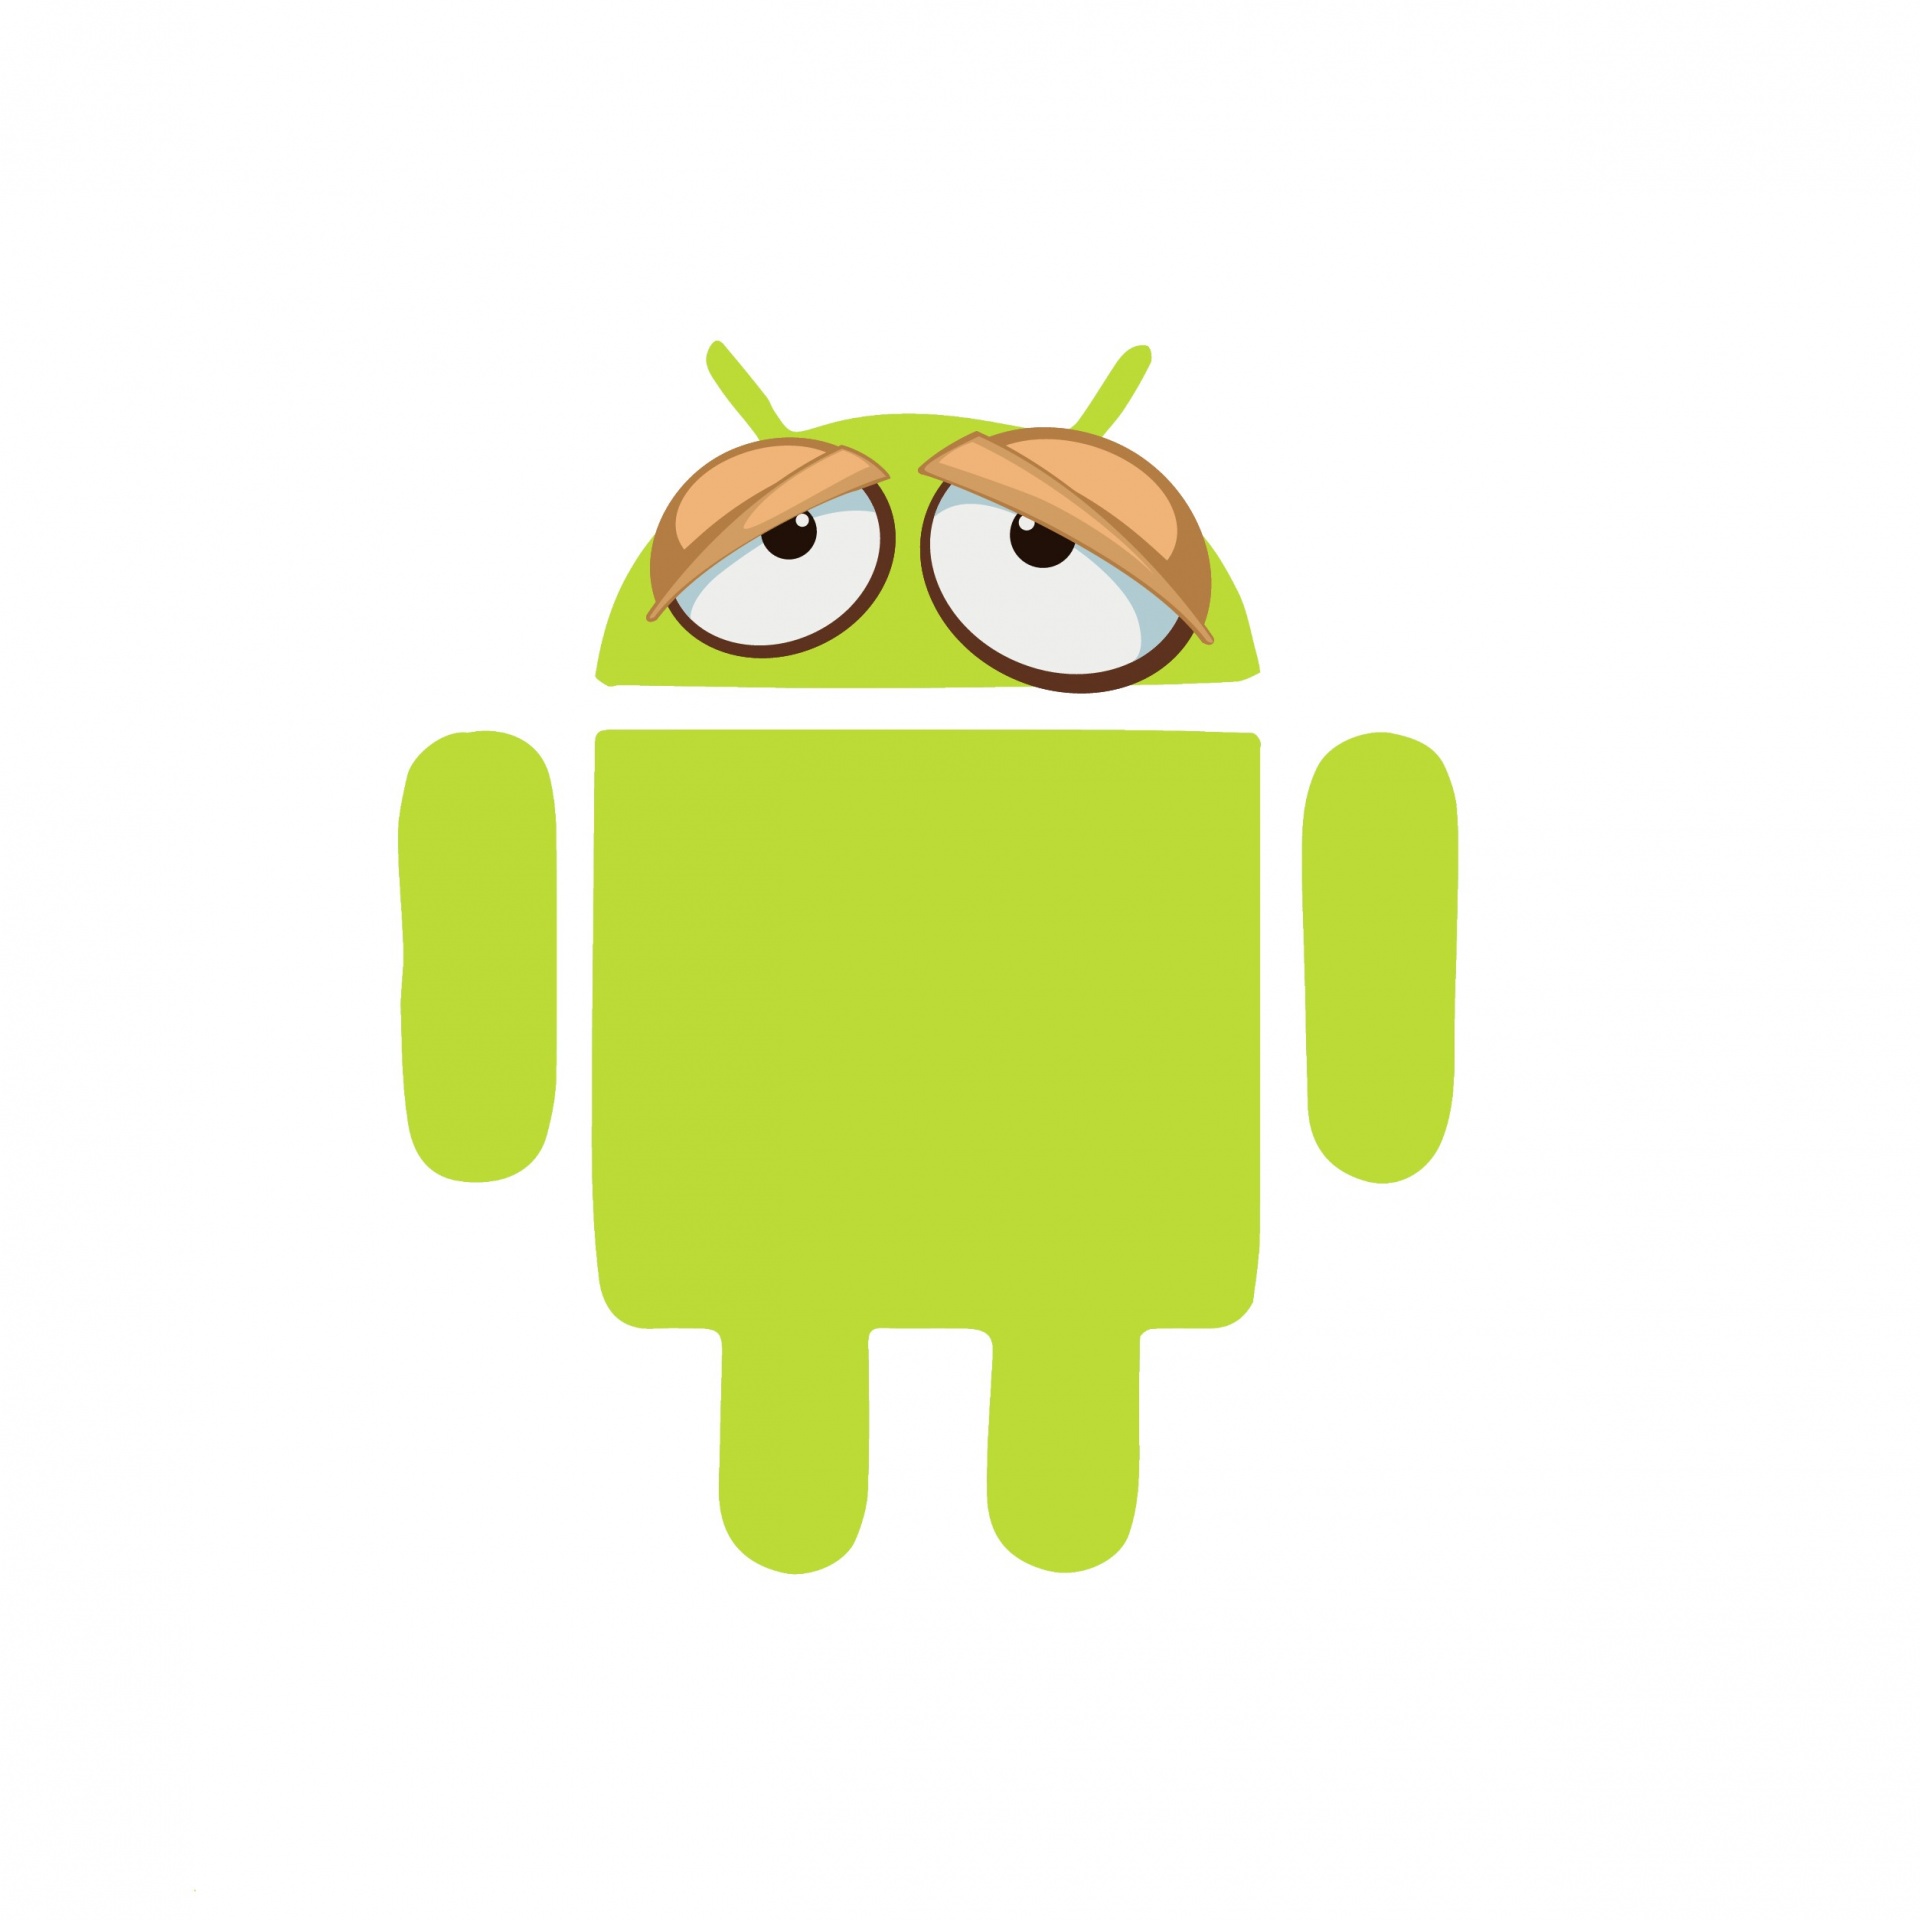 File:Android robot.png - Wikimedia Commons